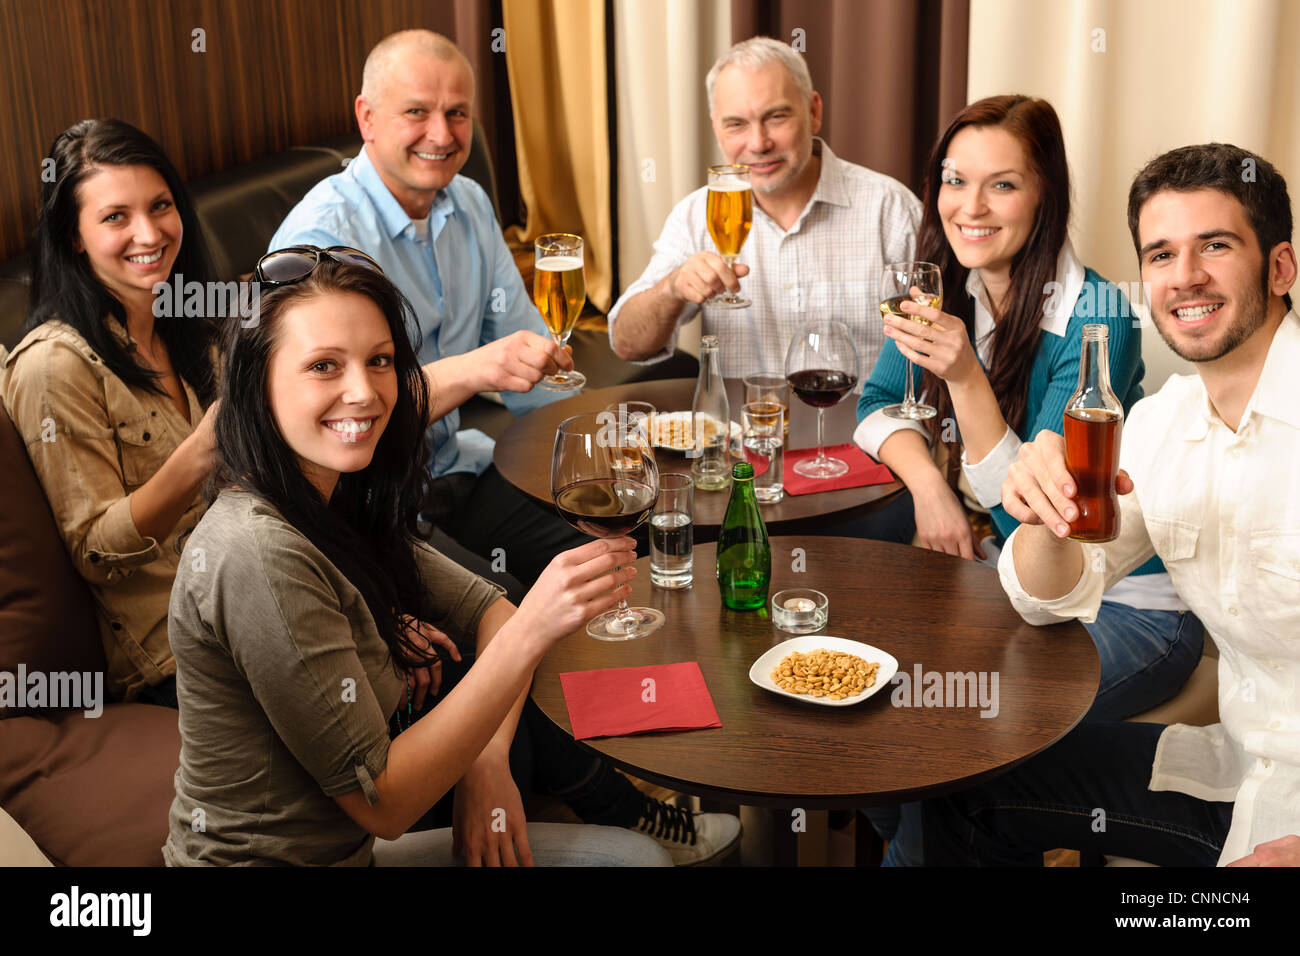 Drink after work happy colleagues having fun at fancy restaurant Stock Photo